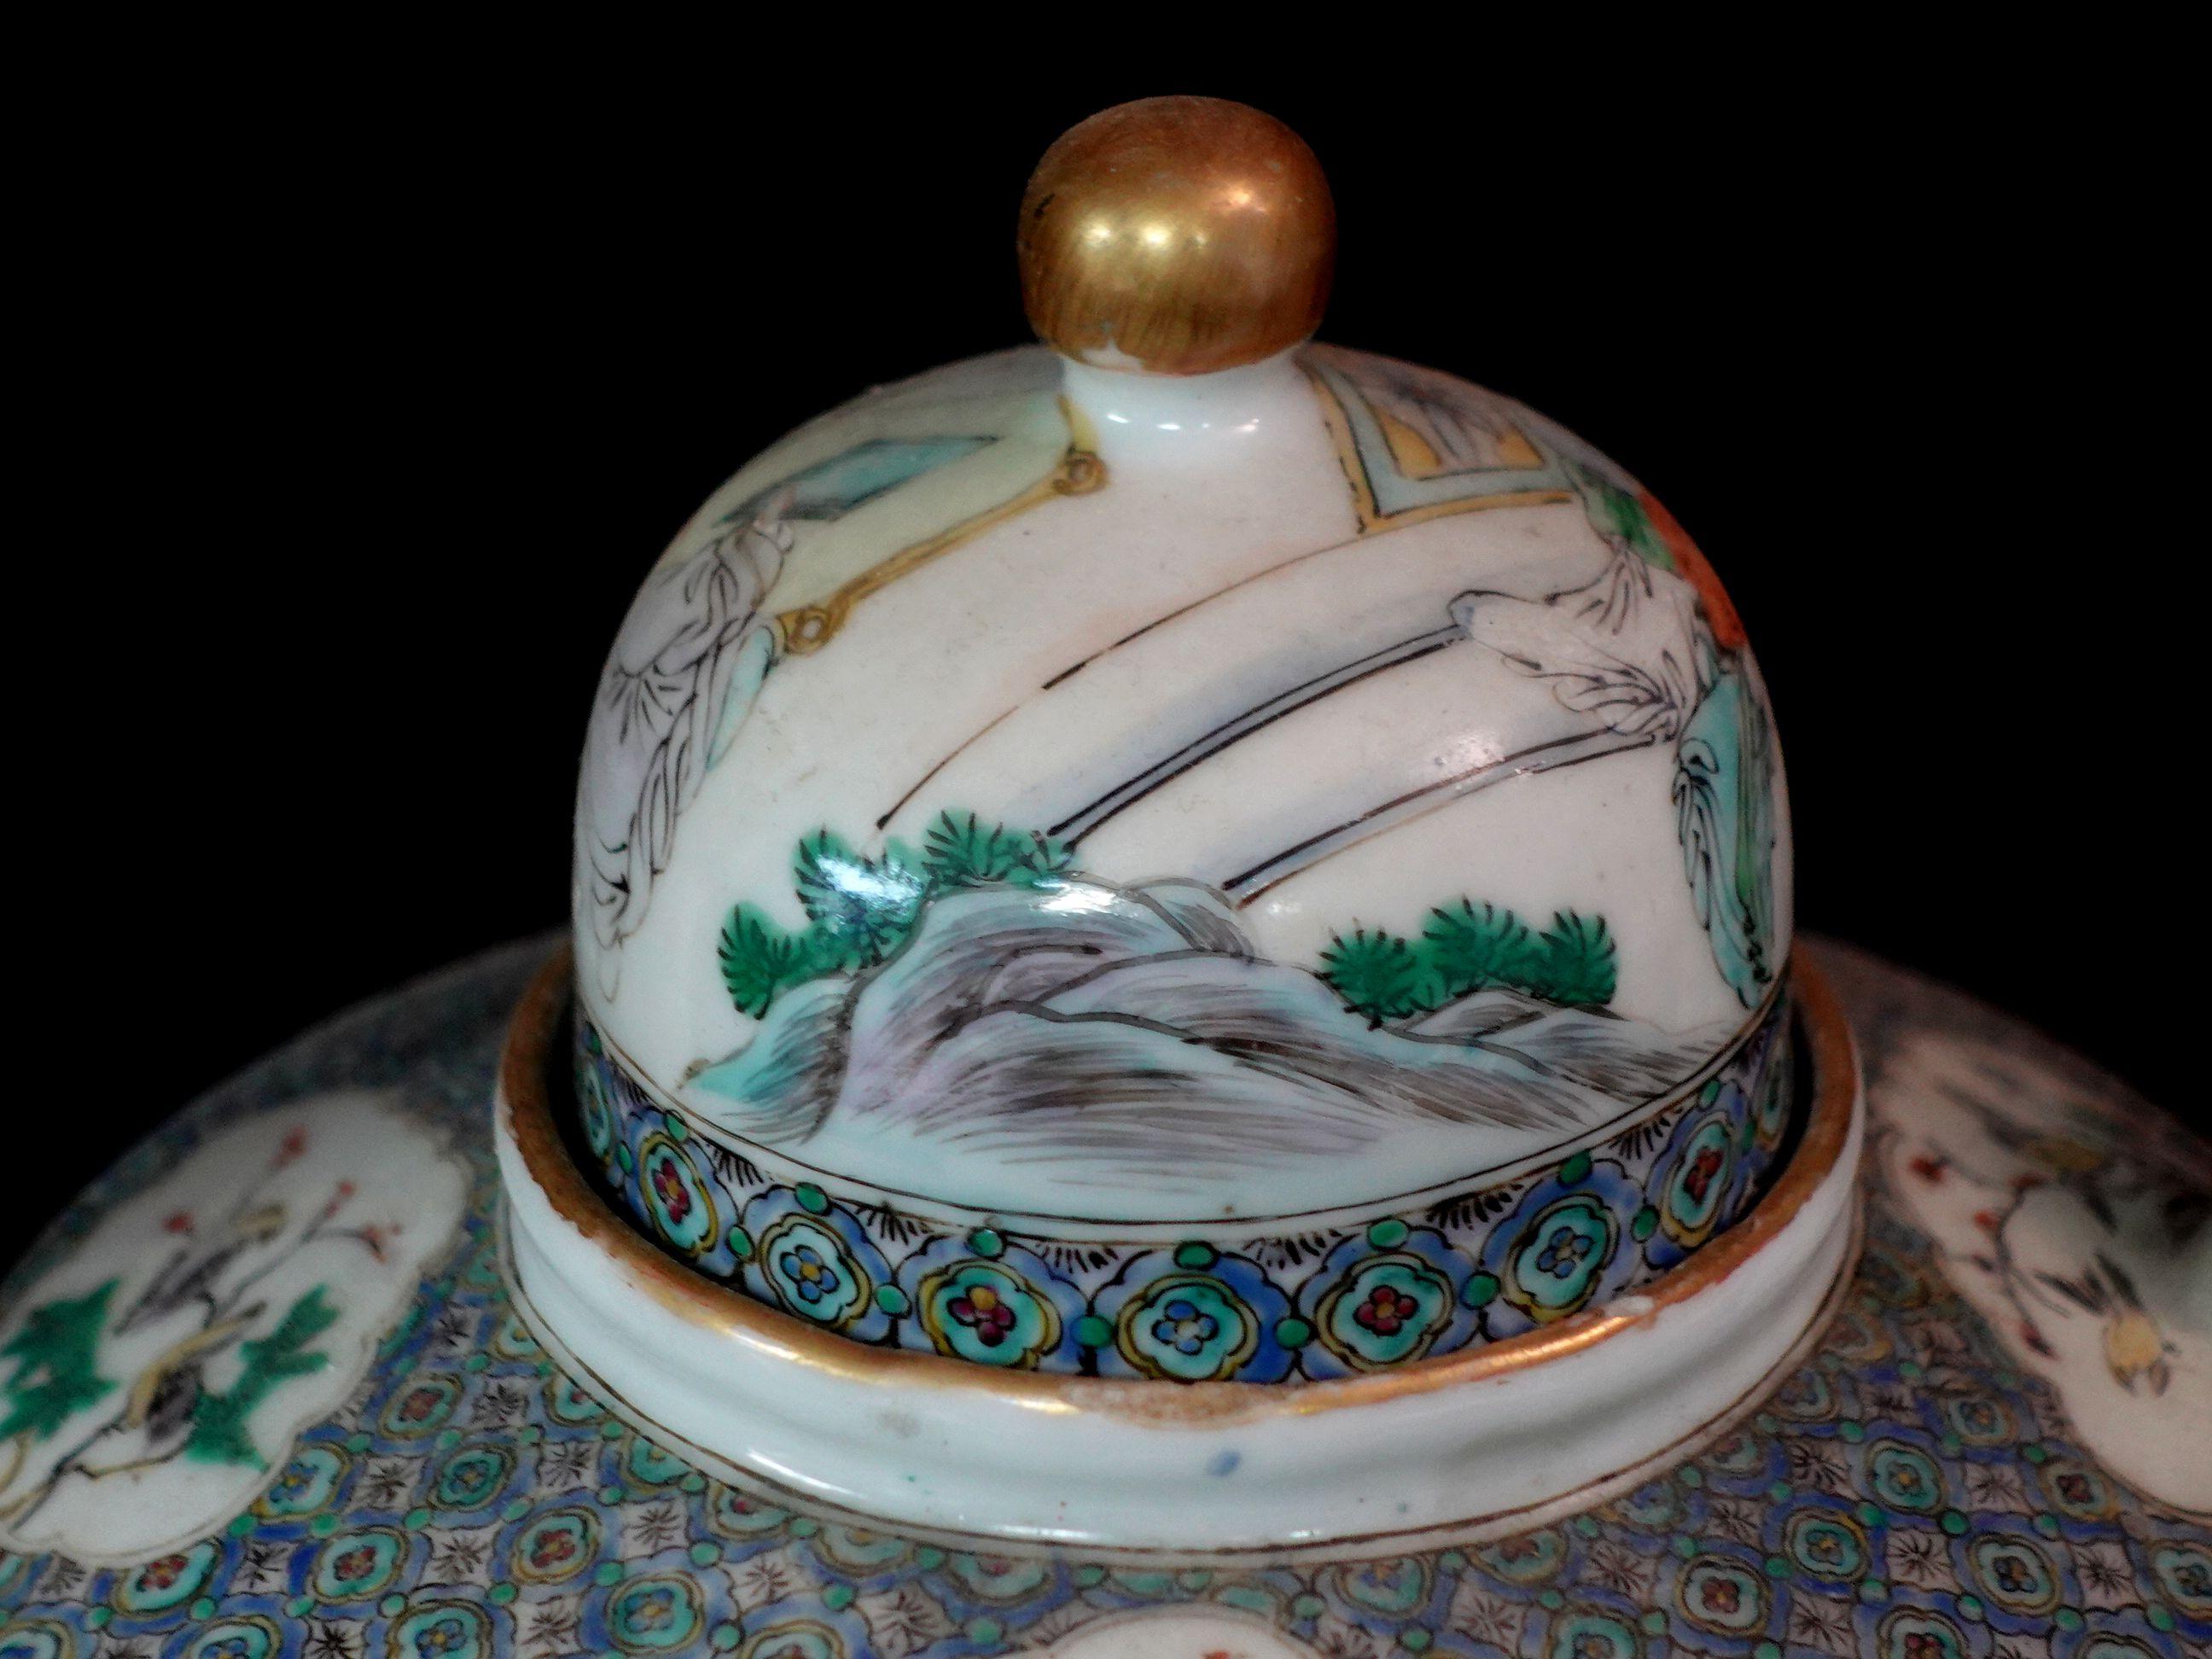 Antique Chinese Famille Rose Porcelain Teapot, early 19th Century In Good Condition For Sale In Norton, MA